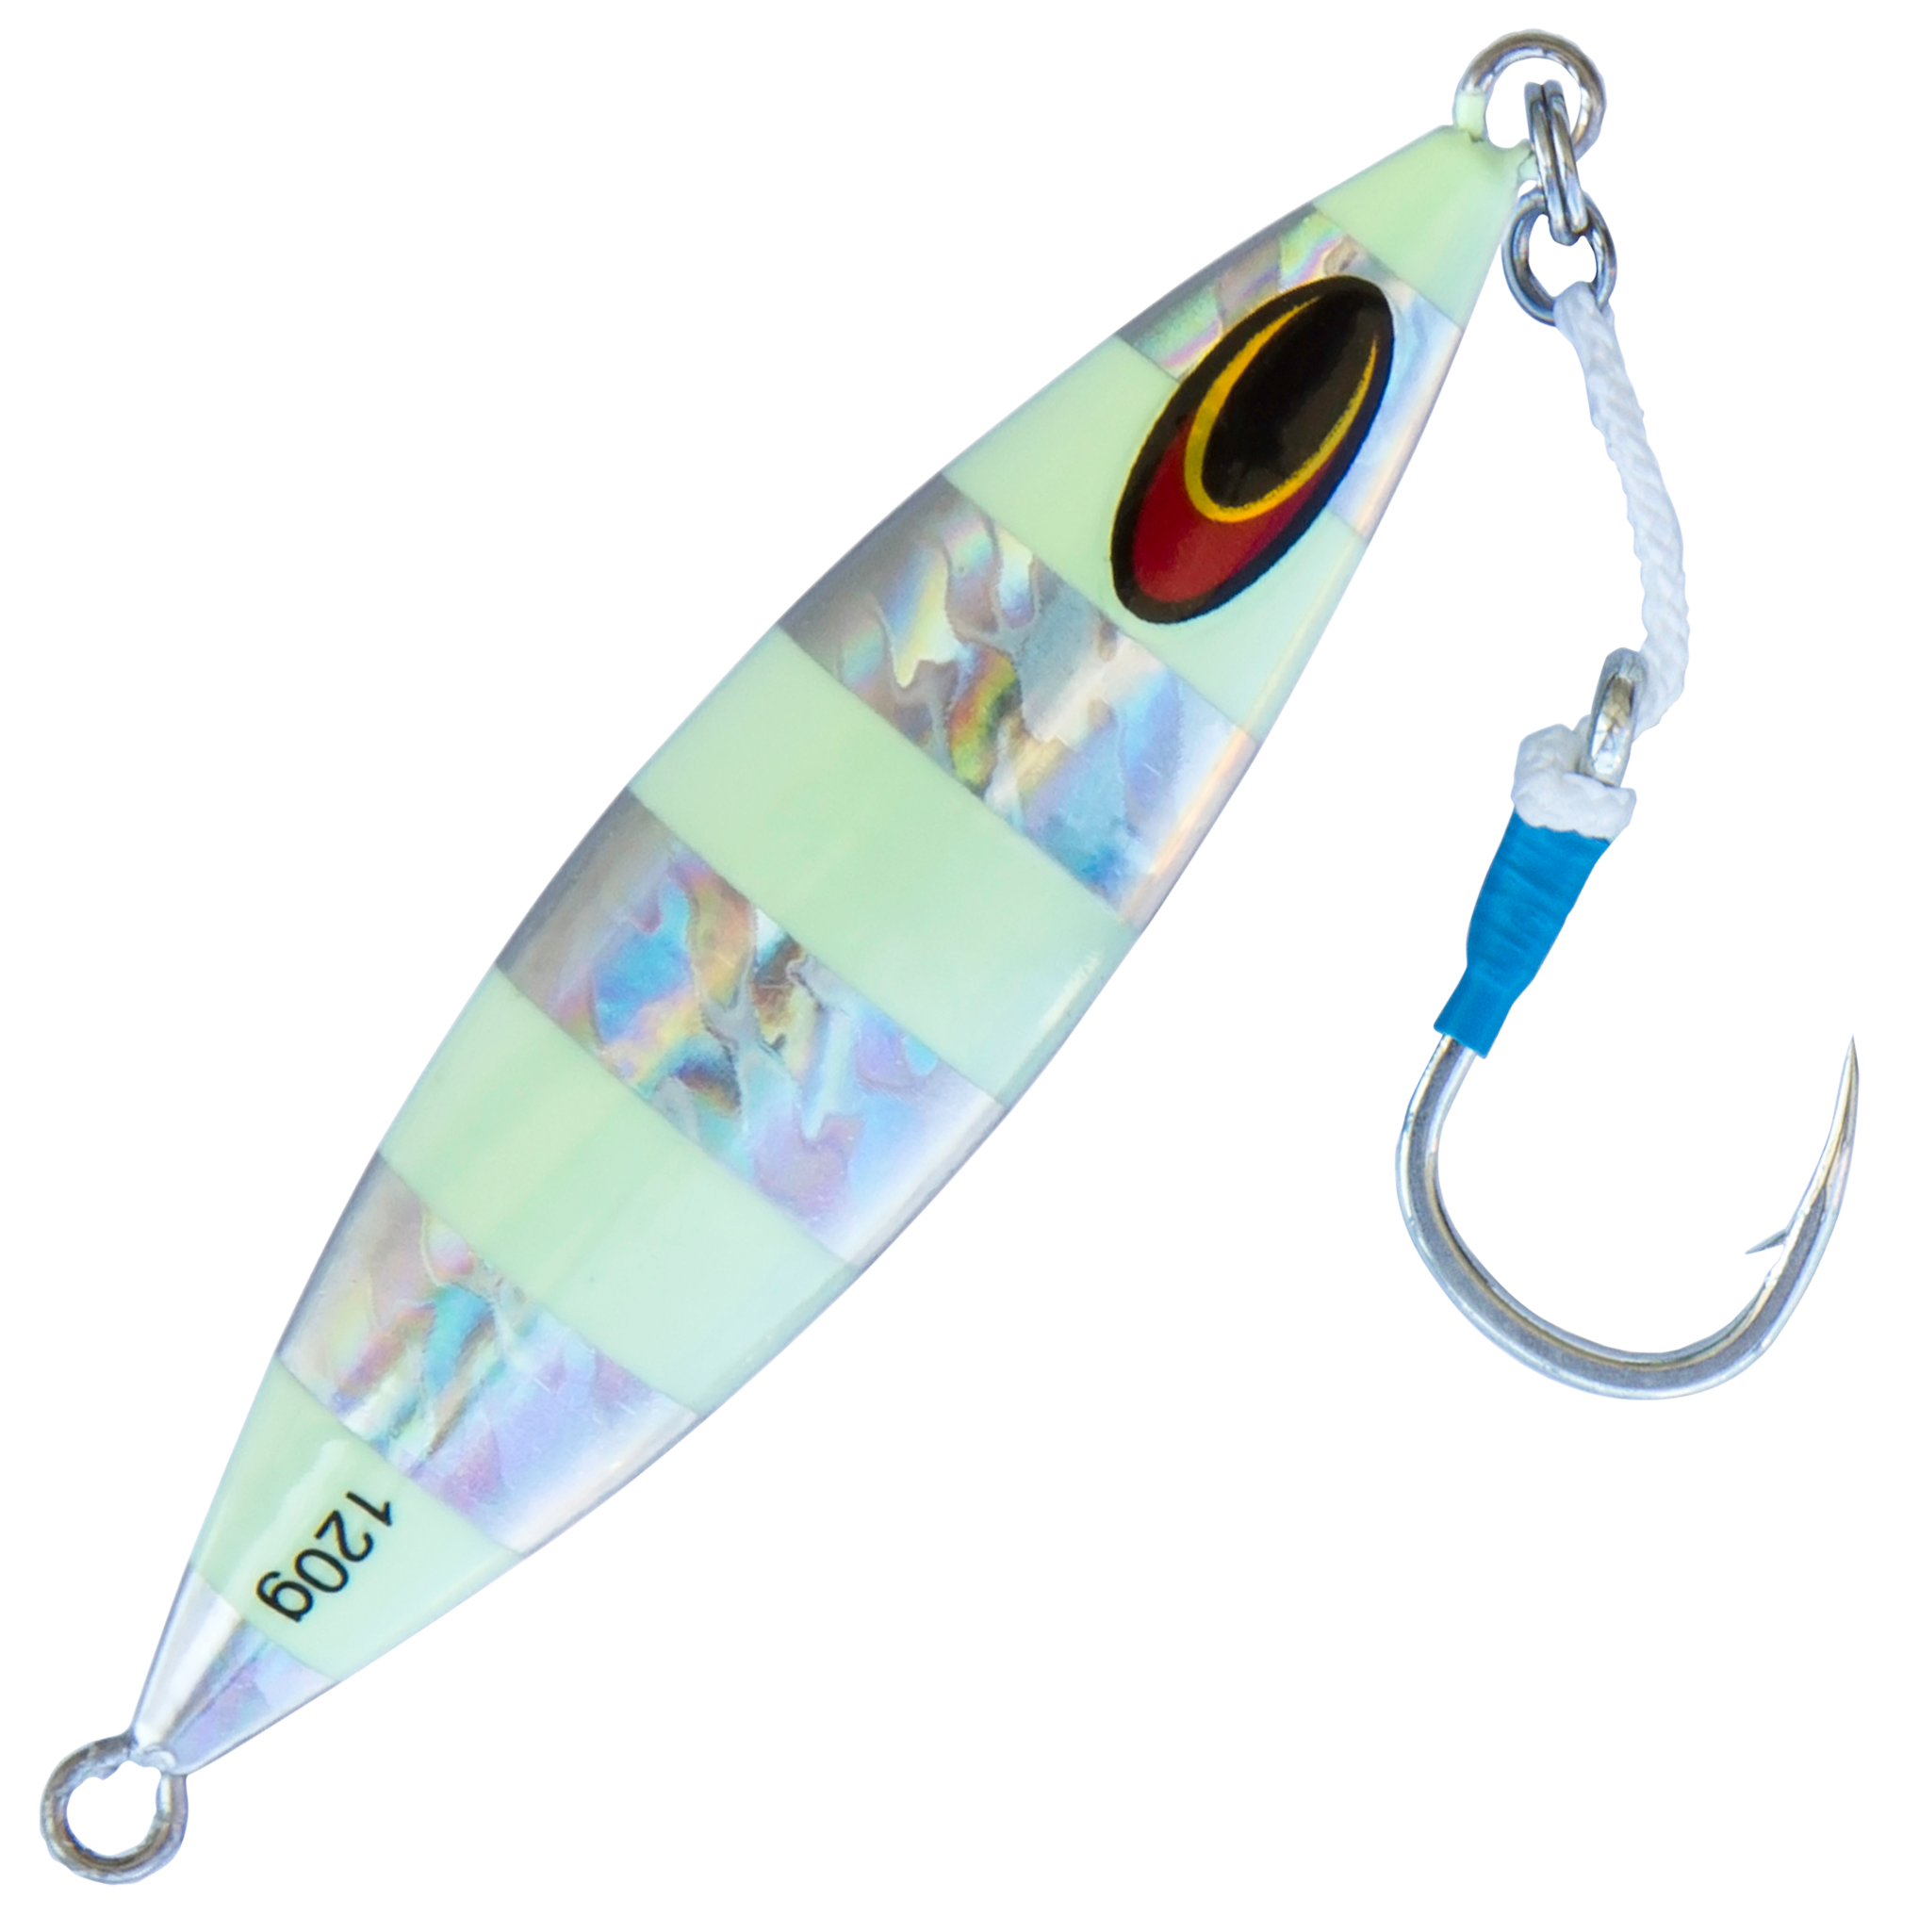 Nomad Design Gypsy Jig - 80g - Chartreuse White Glow